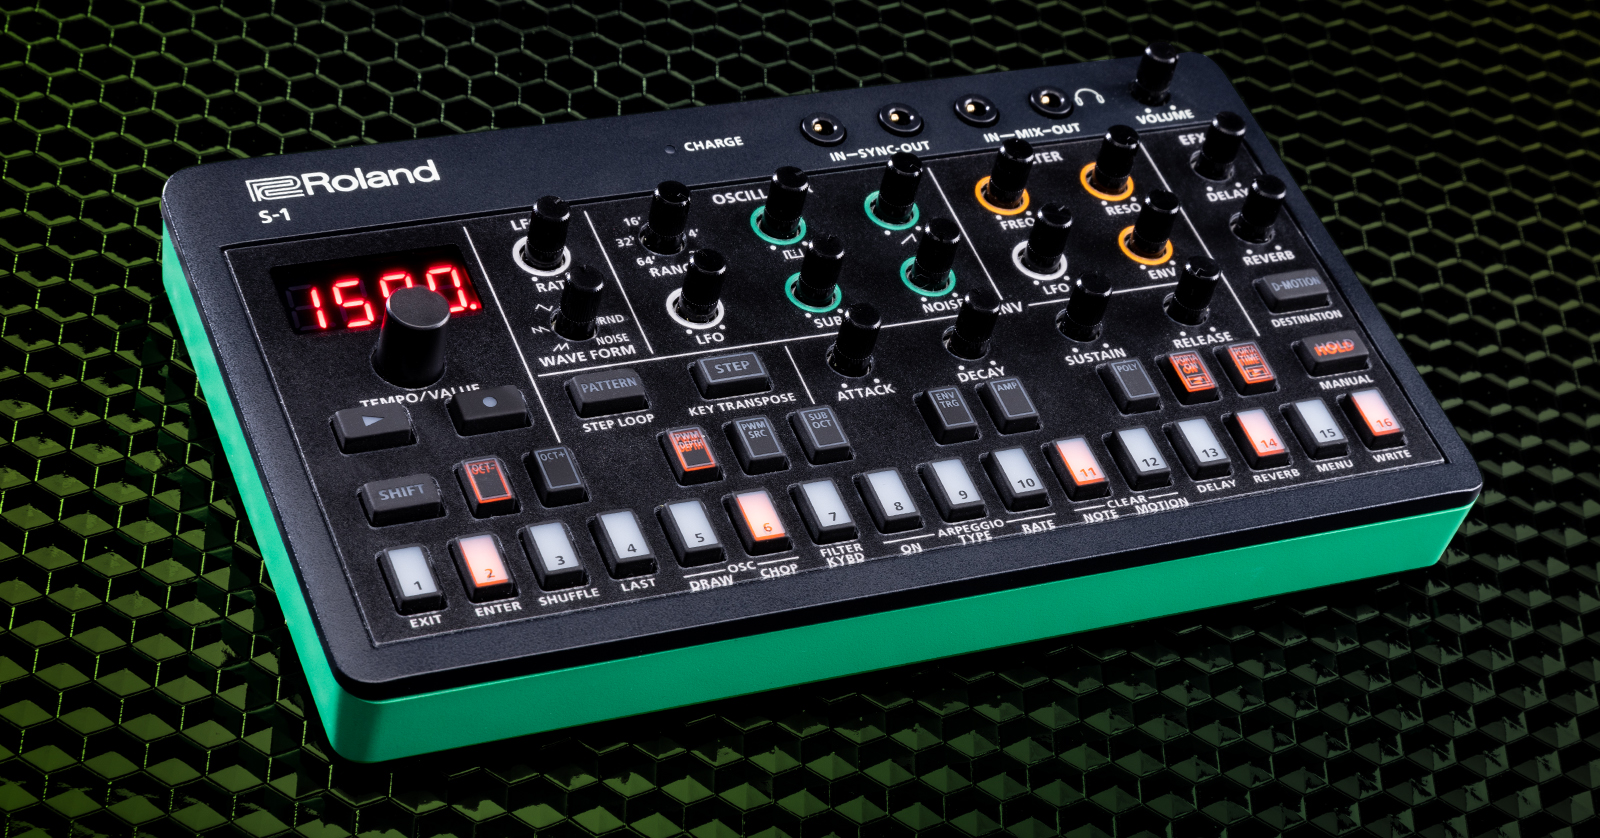 How to Use the Roland Aira Compact S-1 Tweak Synth | Sweetwater